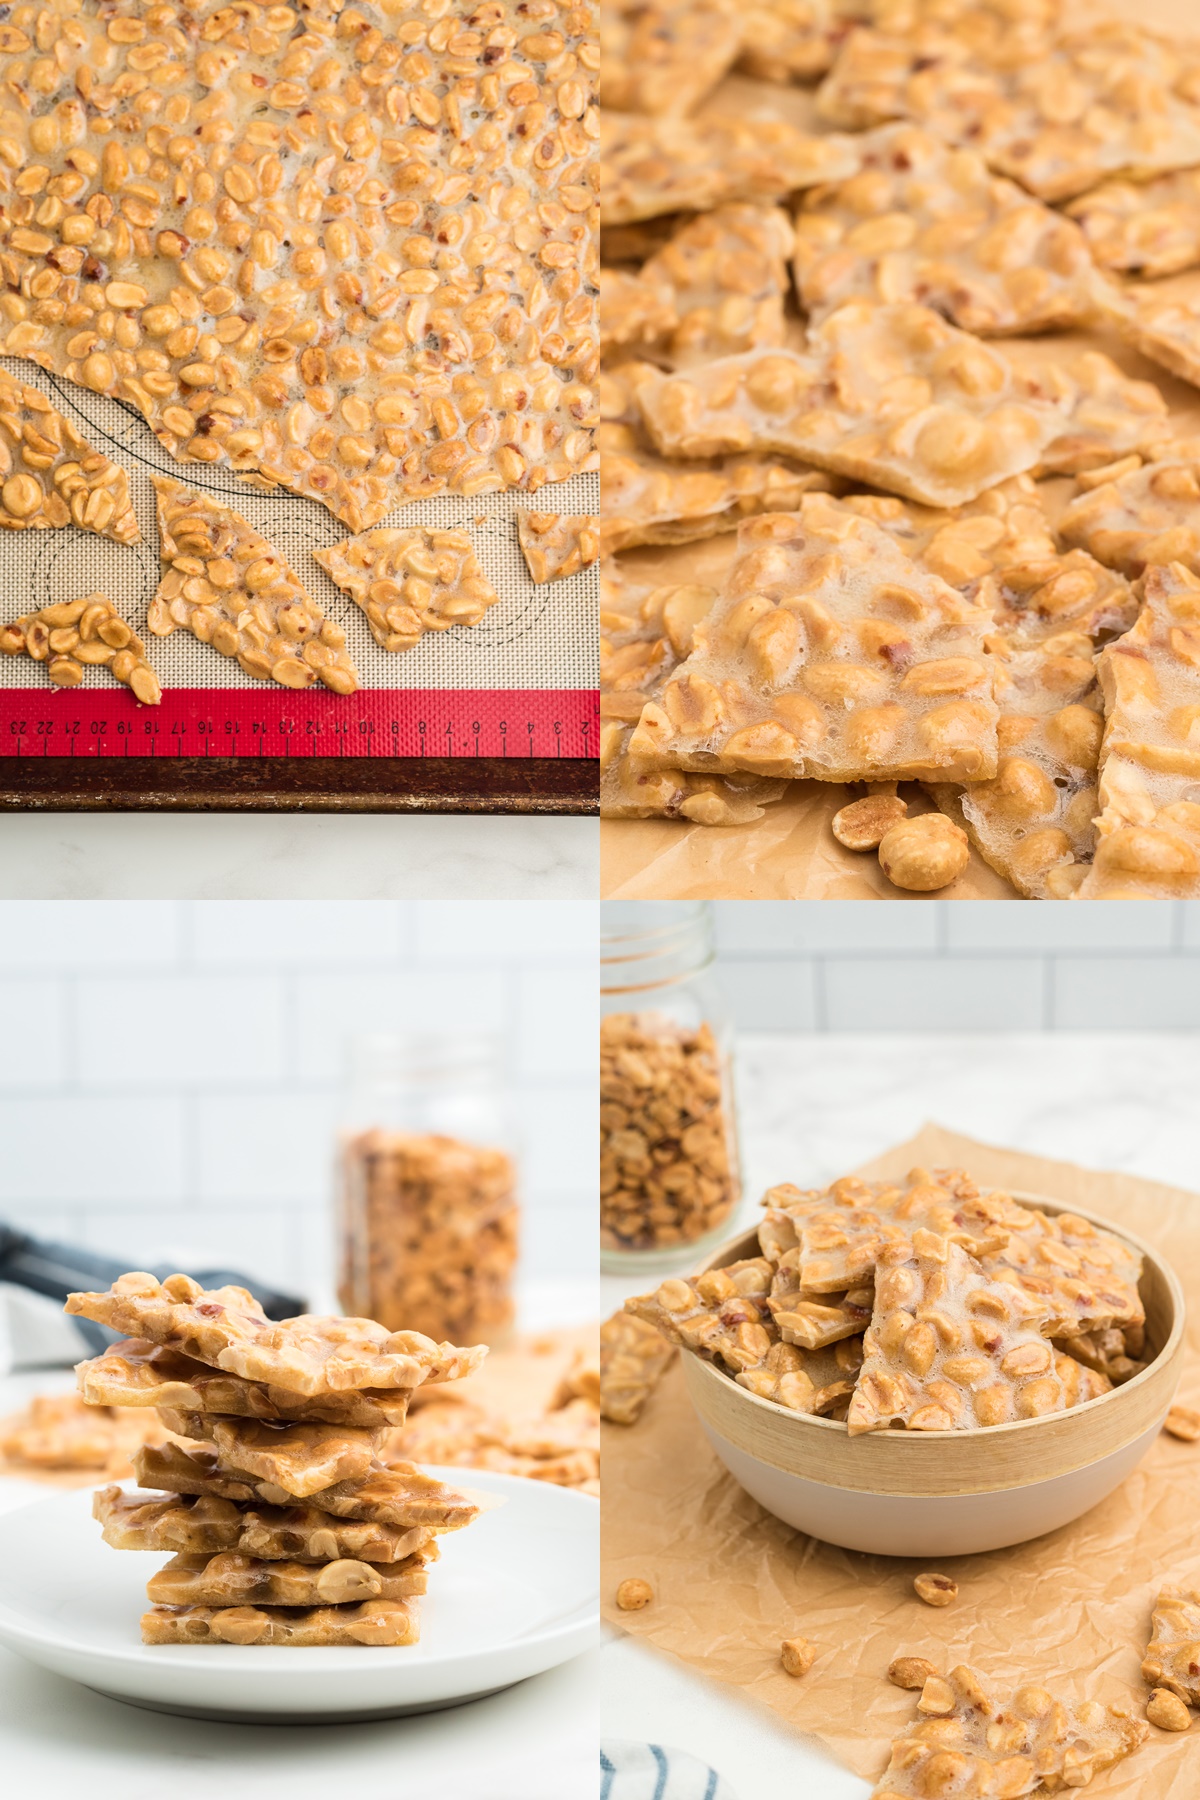 Process of creating an easy microwave peanut brittle recipe